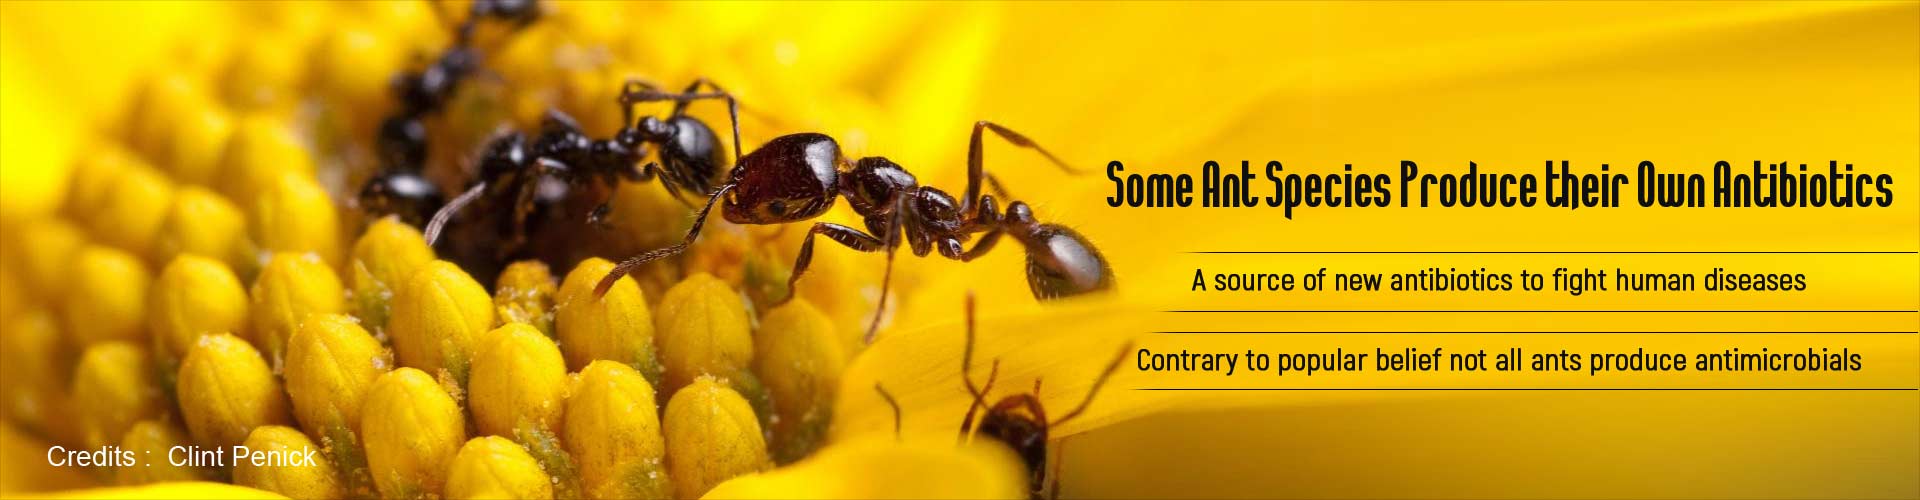 Some ants species produce their own antibiotics
- a source of new antibiotics to fight human diseases
- contrary to popular belief not all ants produce antimicrobials